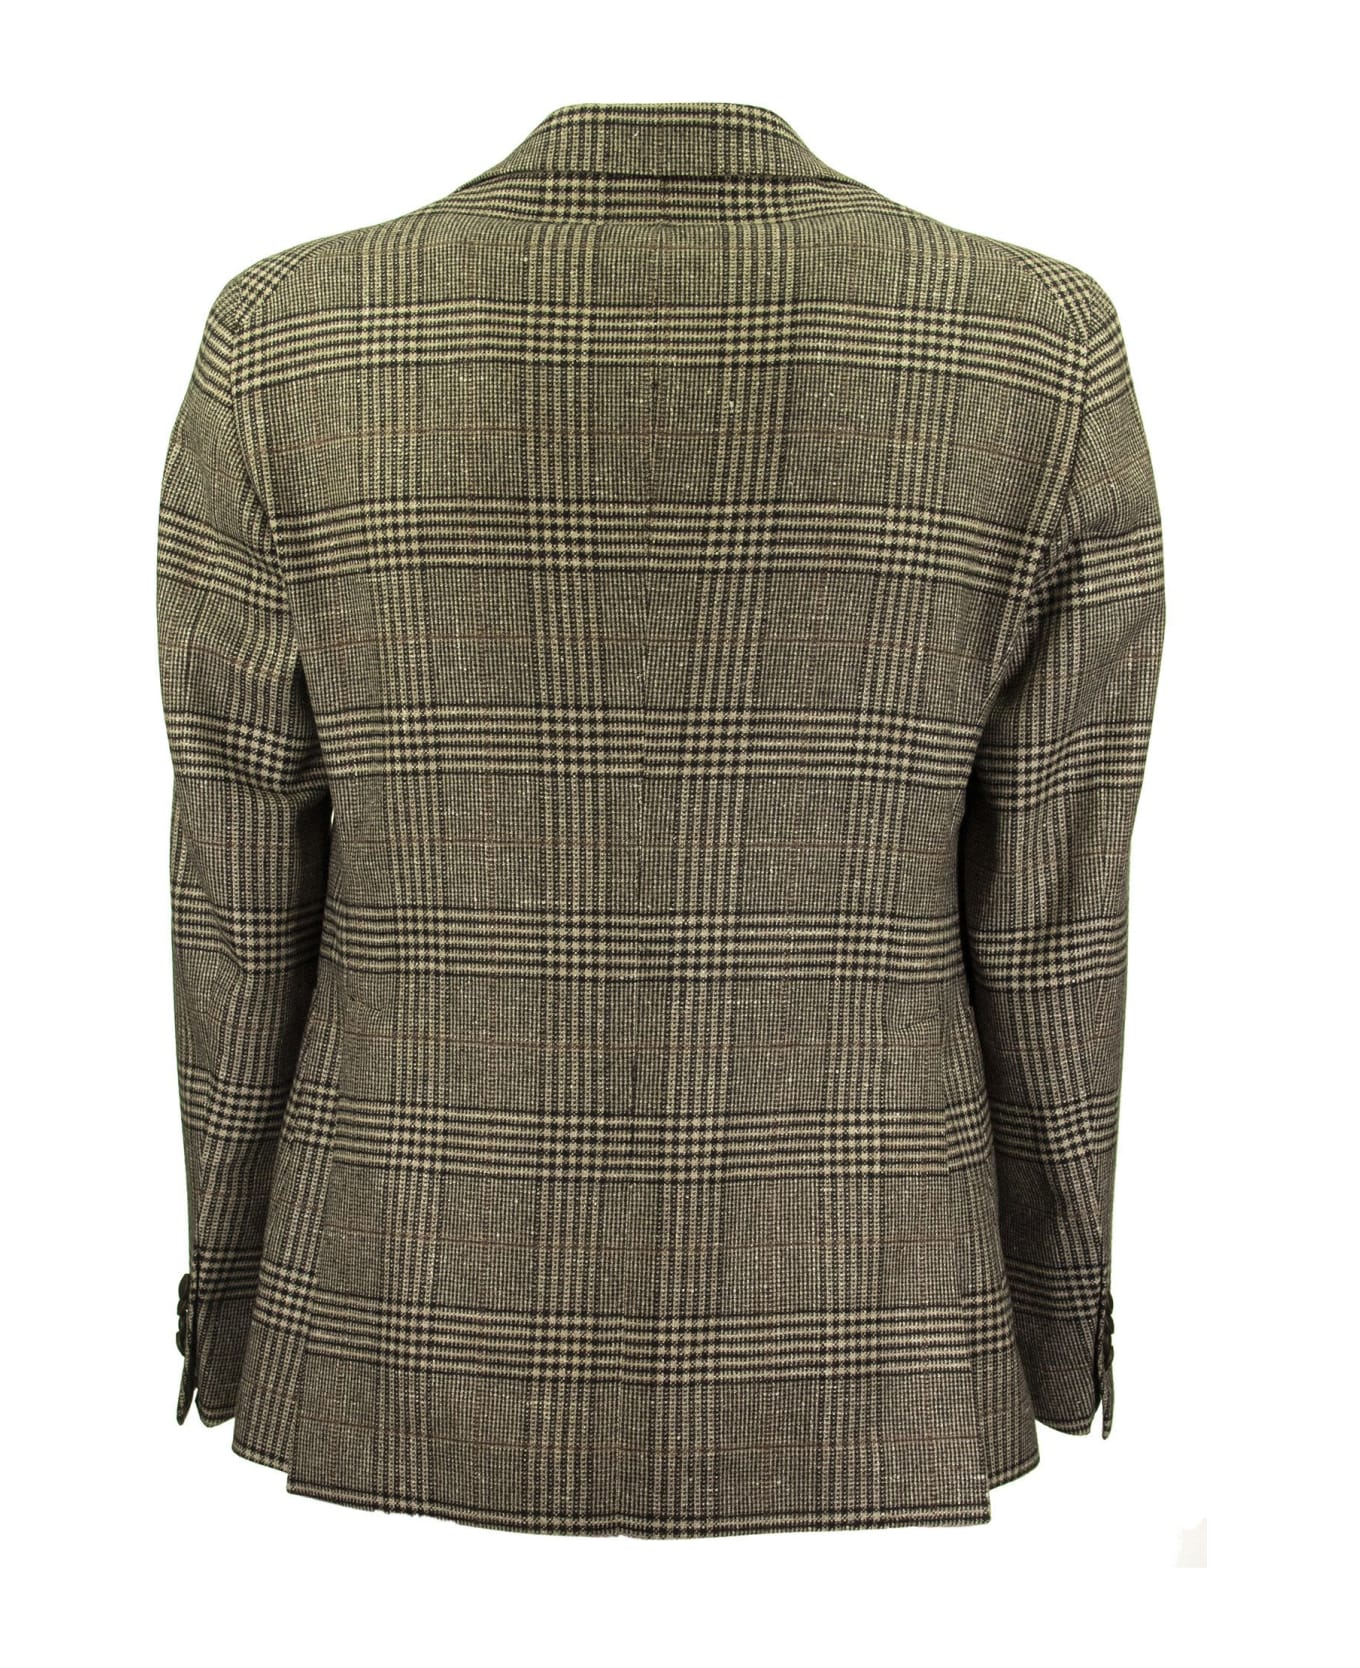 Tagliatore Prince Of Wales Jacket In Wool, Silk And Cashmere - Brown/beige スーツ